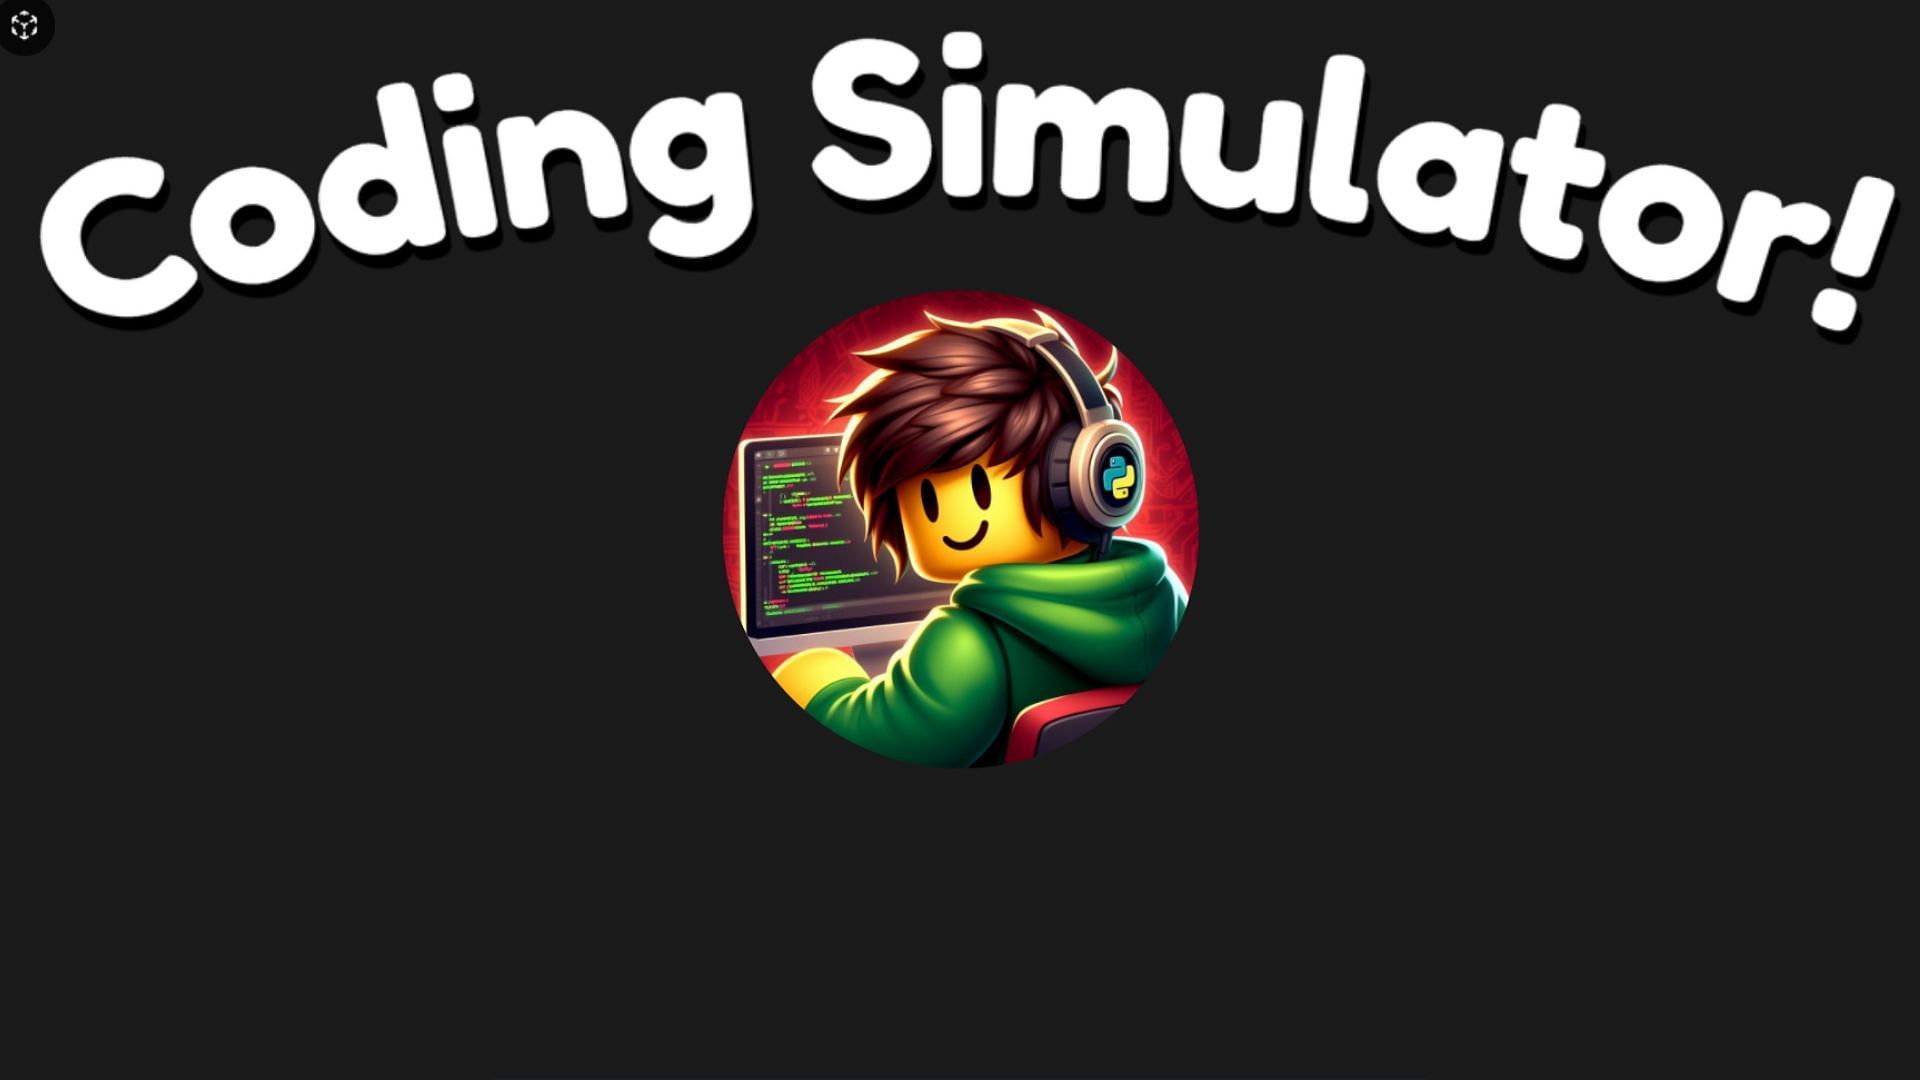 Use our guide to learn everything about Coding Simulator 